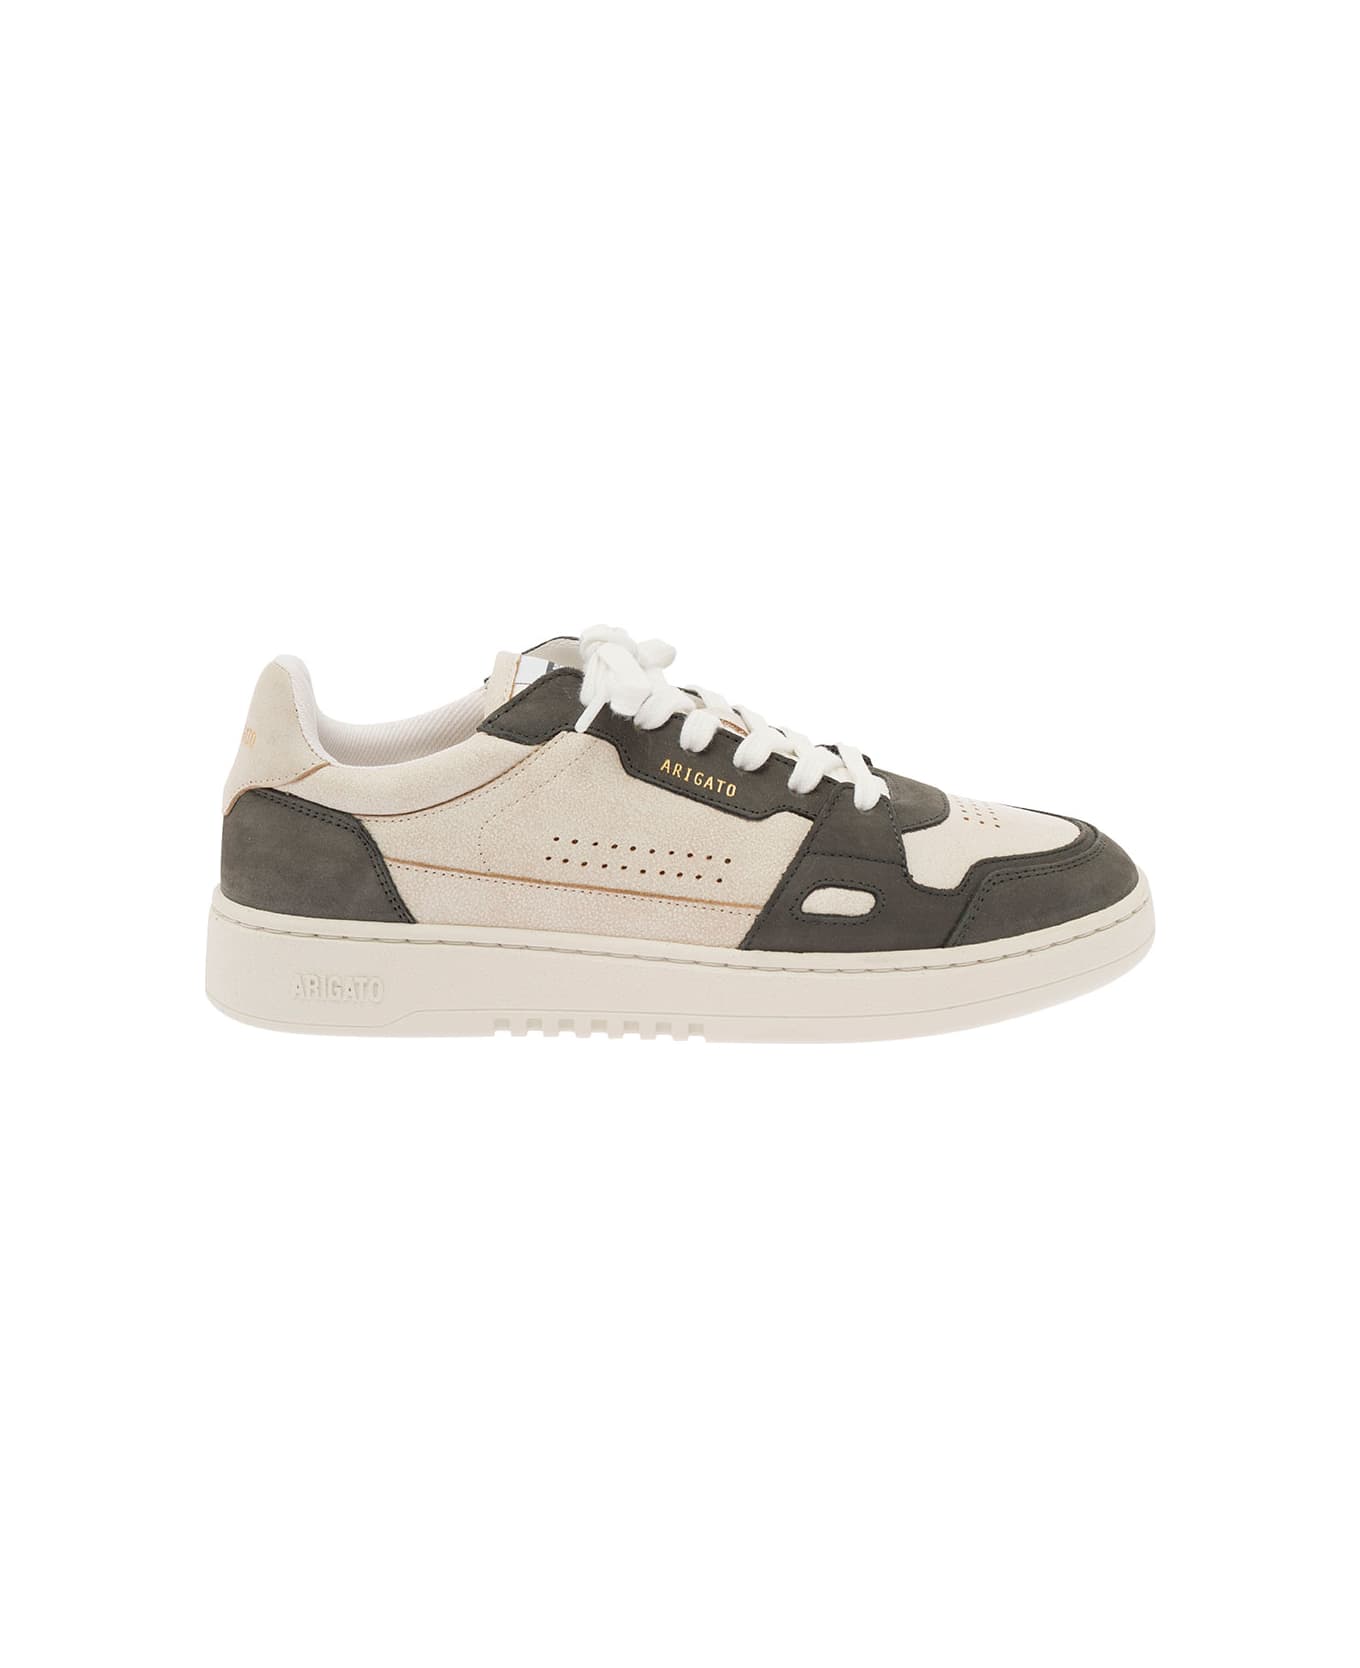 Axel Arigato 'dice Lo' Green And White Two-tone Sneakers In Calf Leather Man - Beige スニーカー